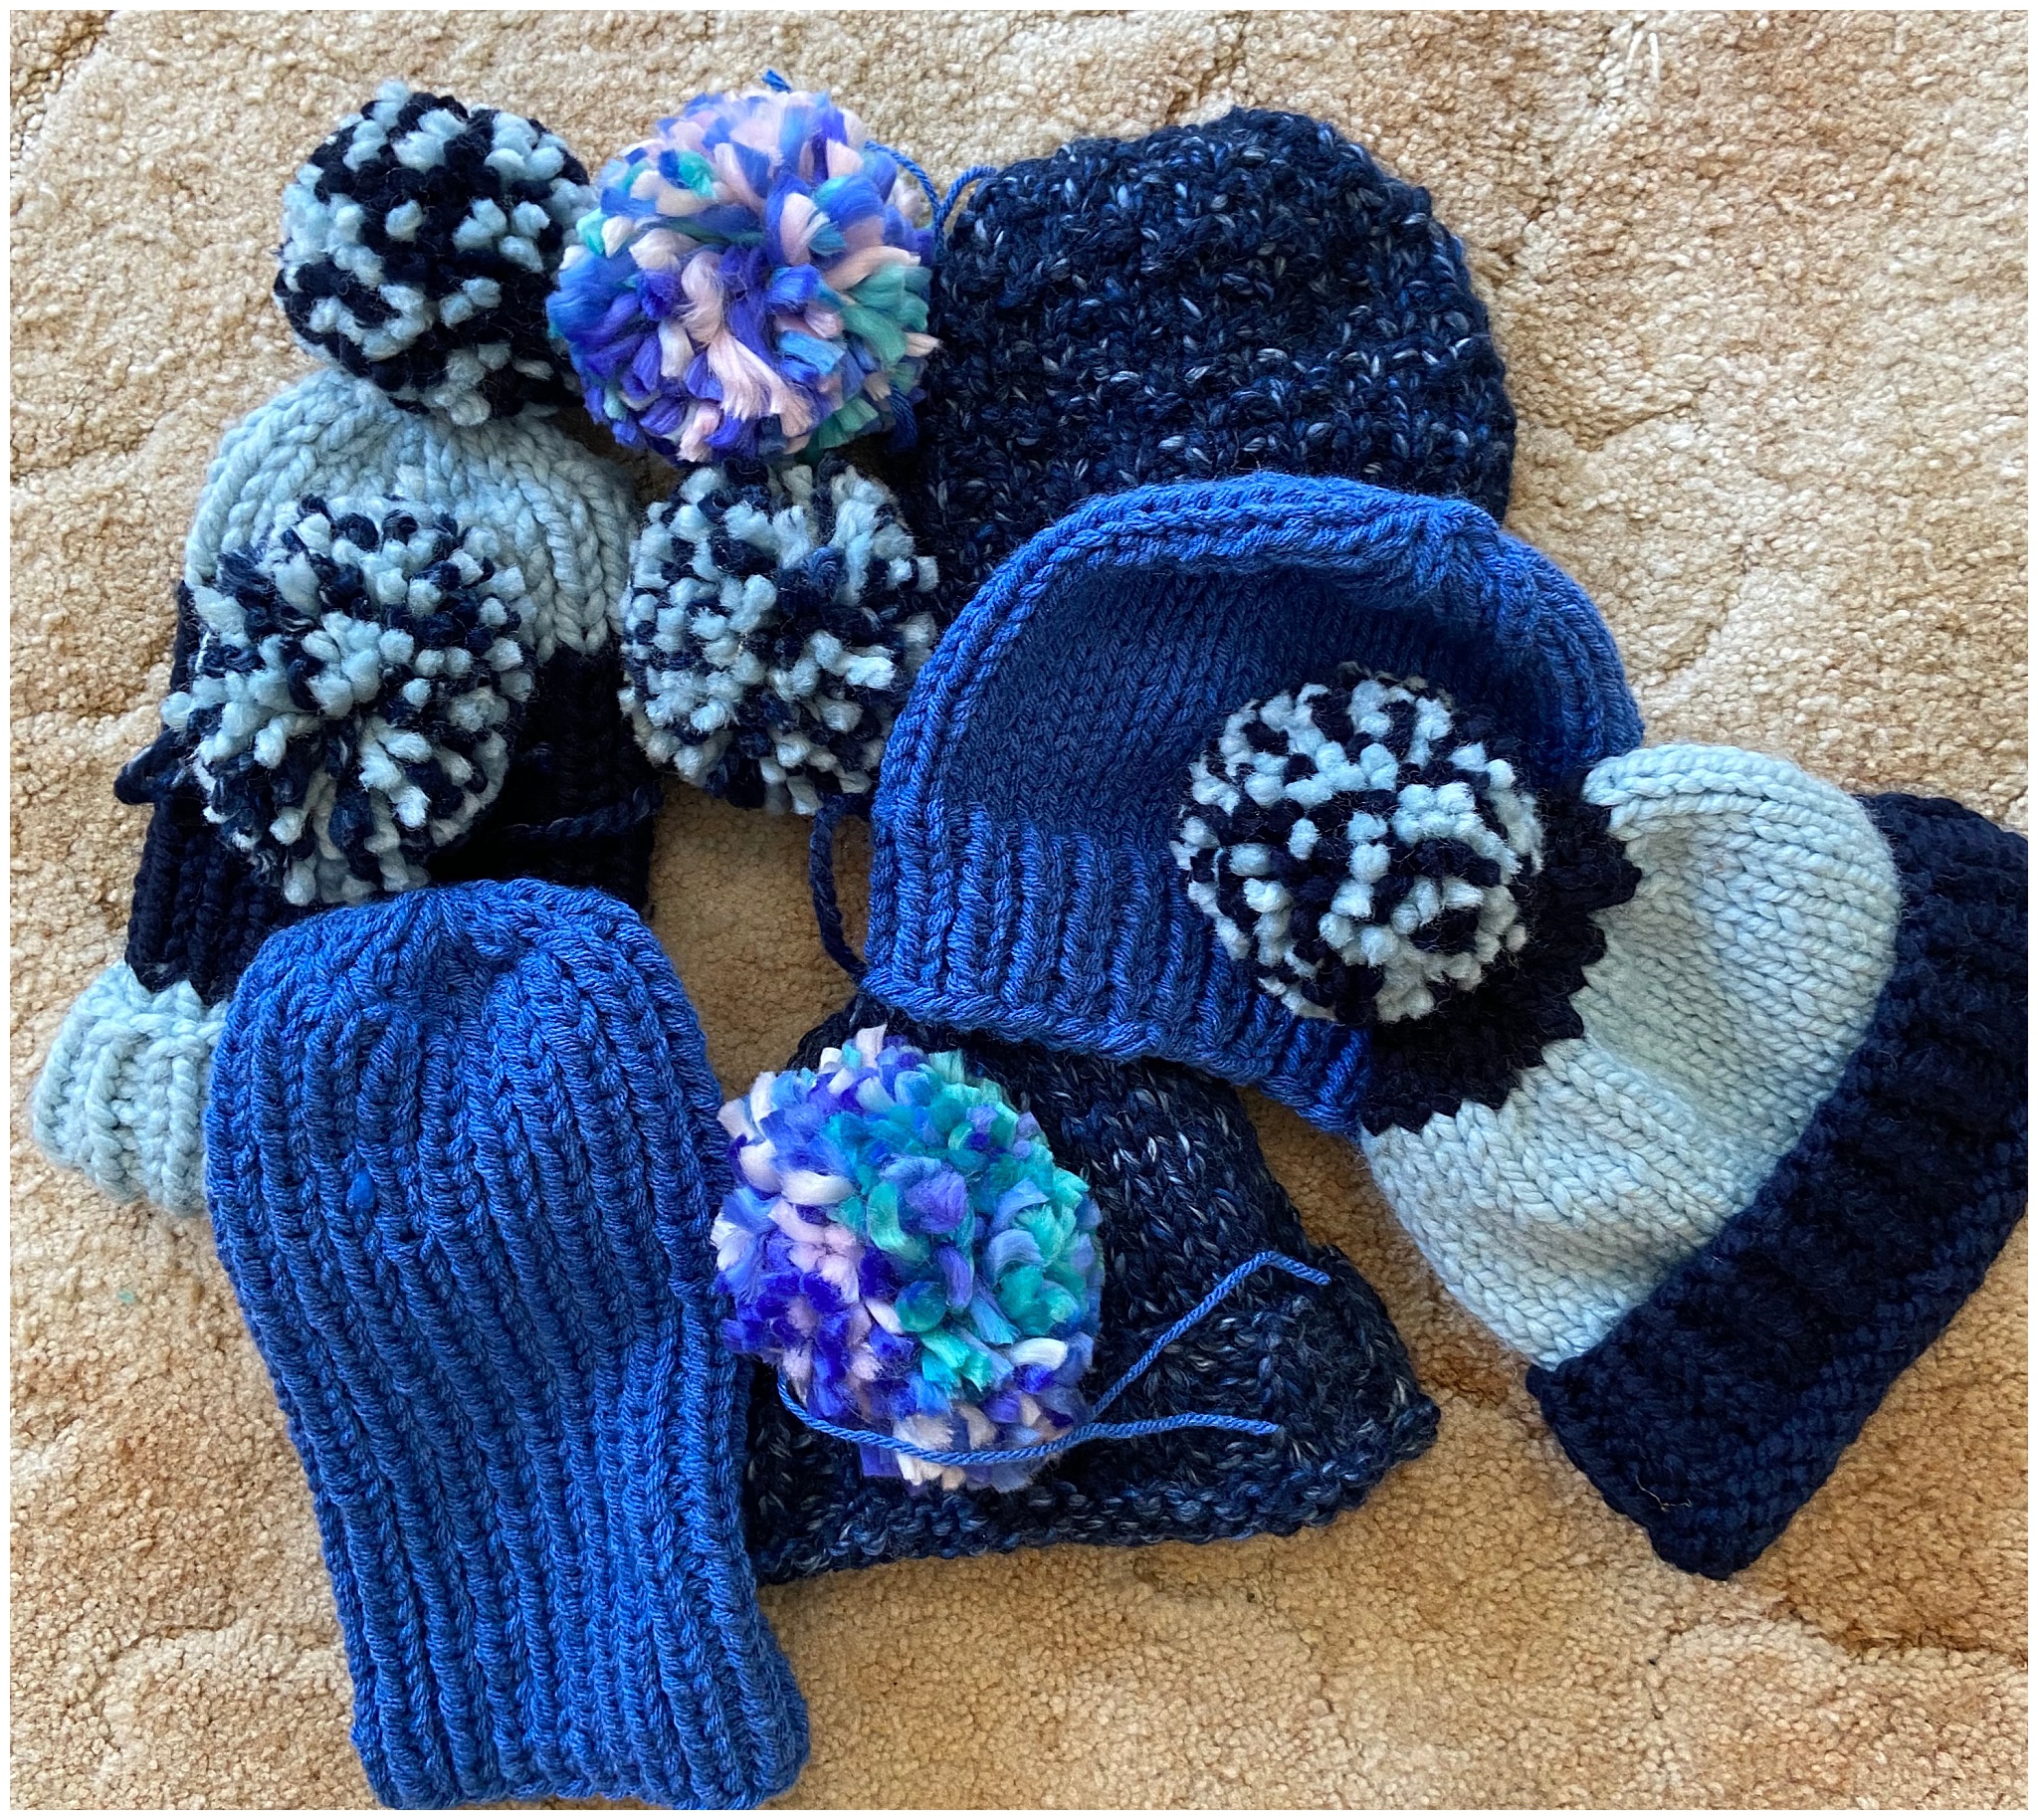 blue hats made for national bully prevention month